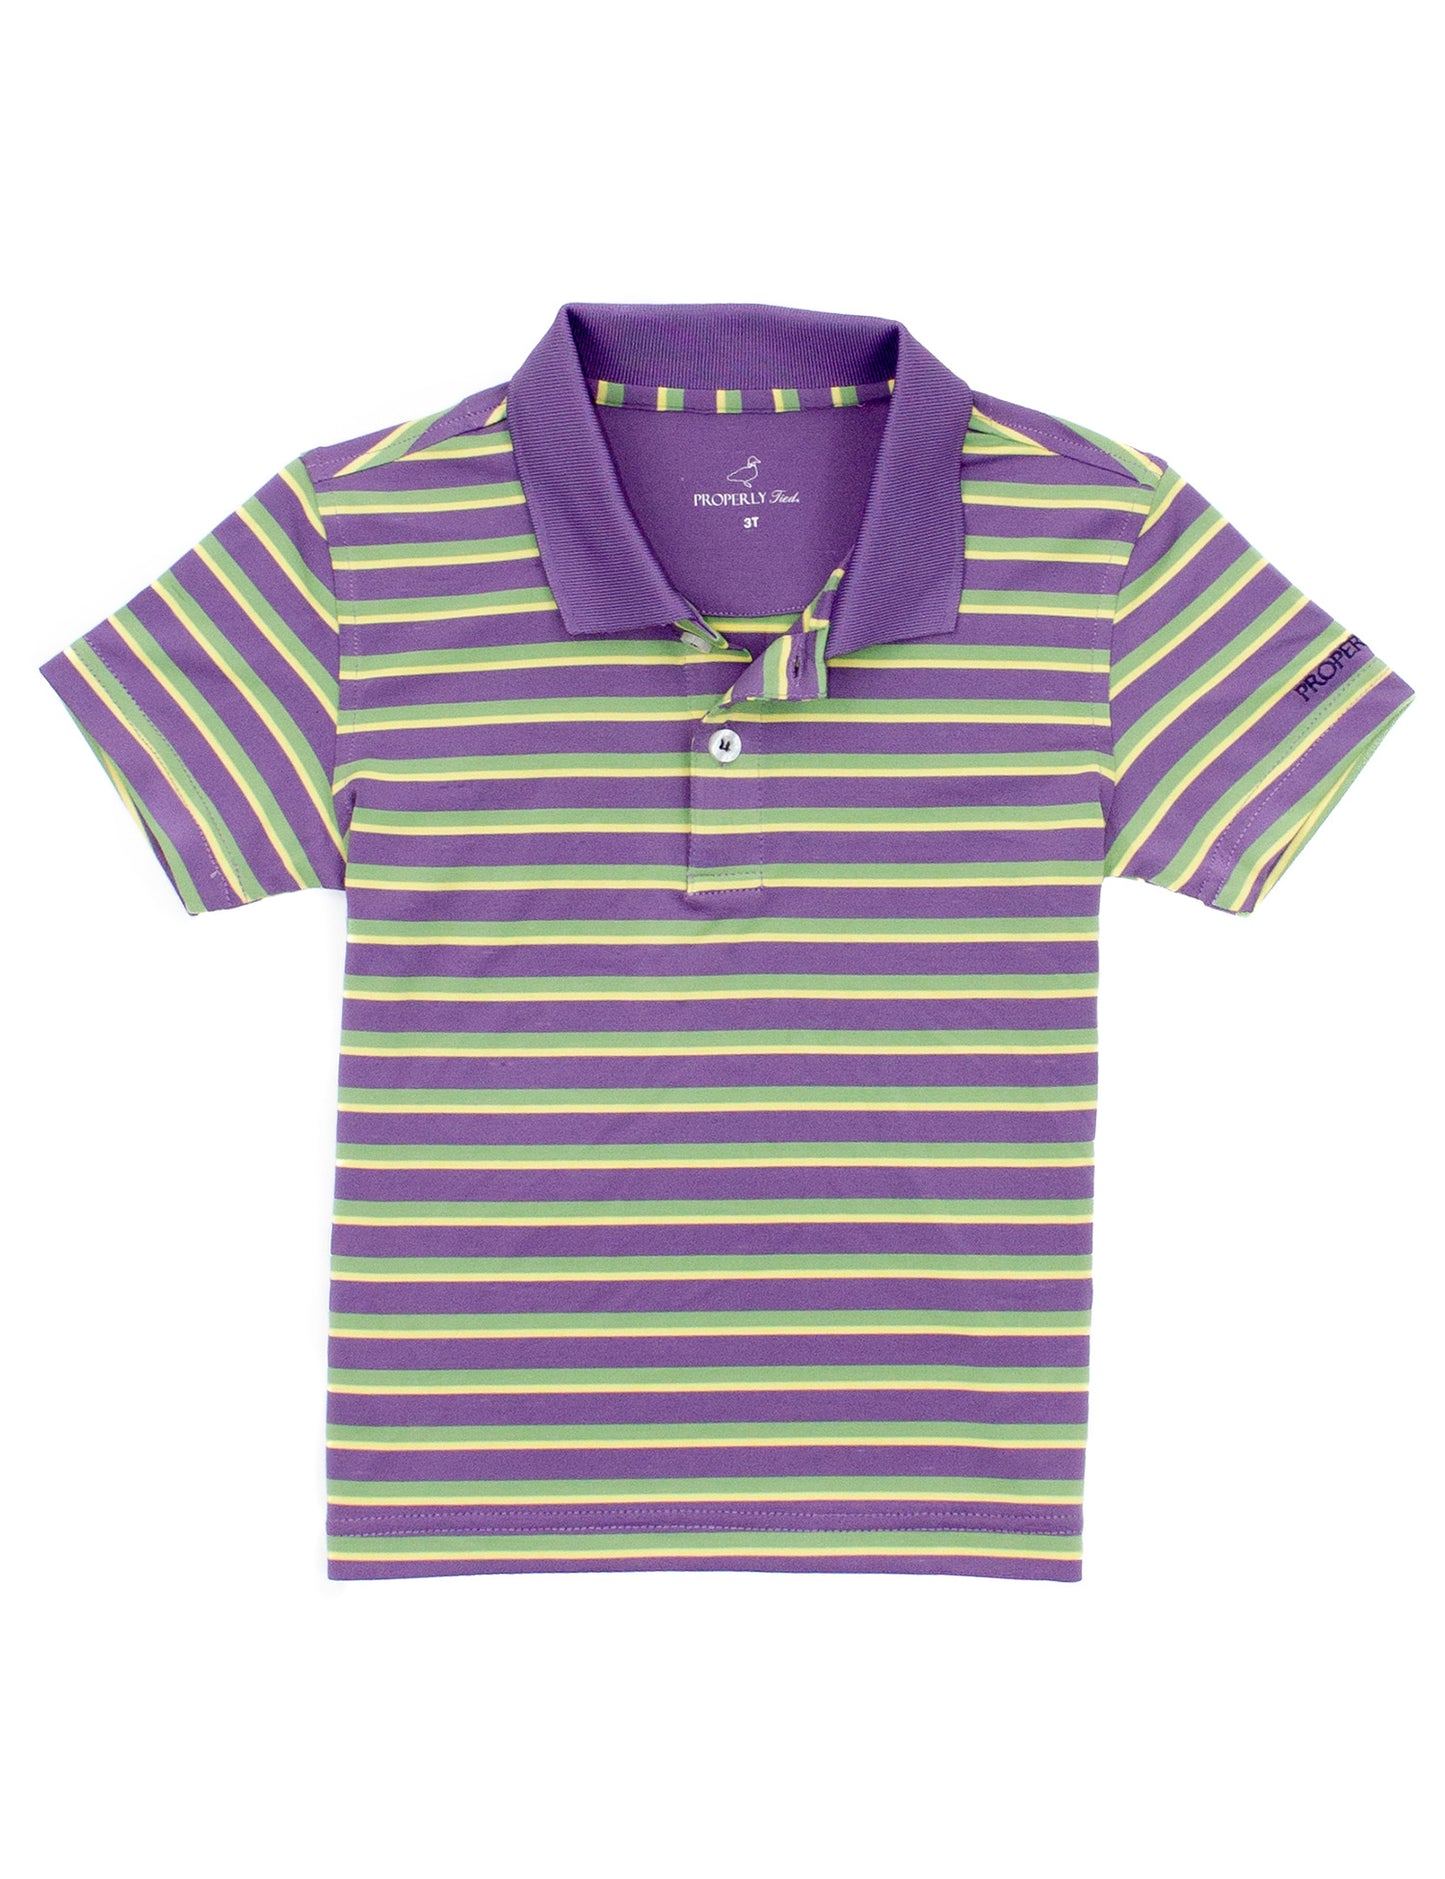 A comfortable Properly Tied Fat Tuesday MG Properly Tied Polo for Kids.